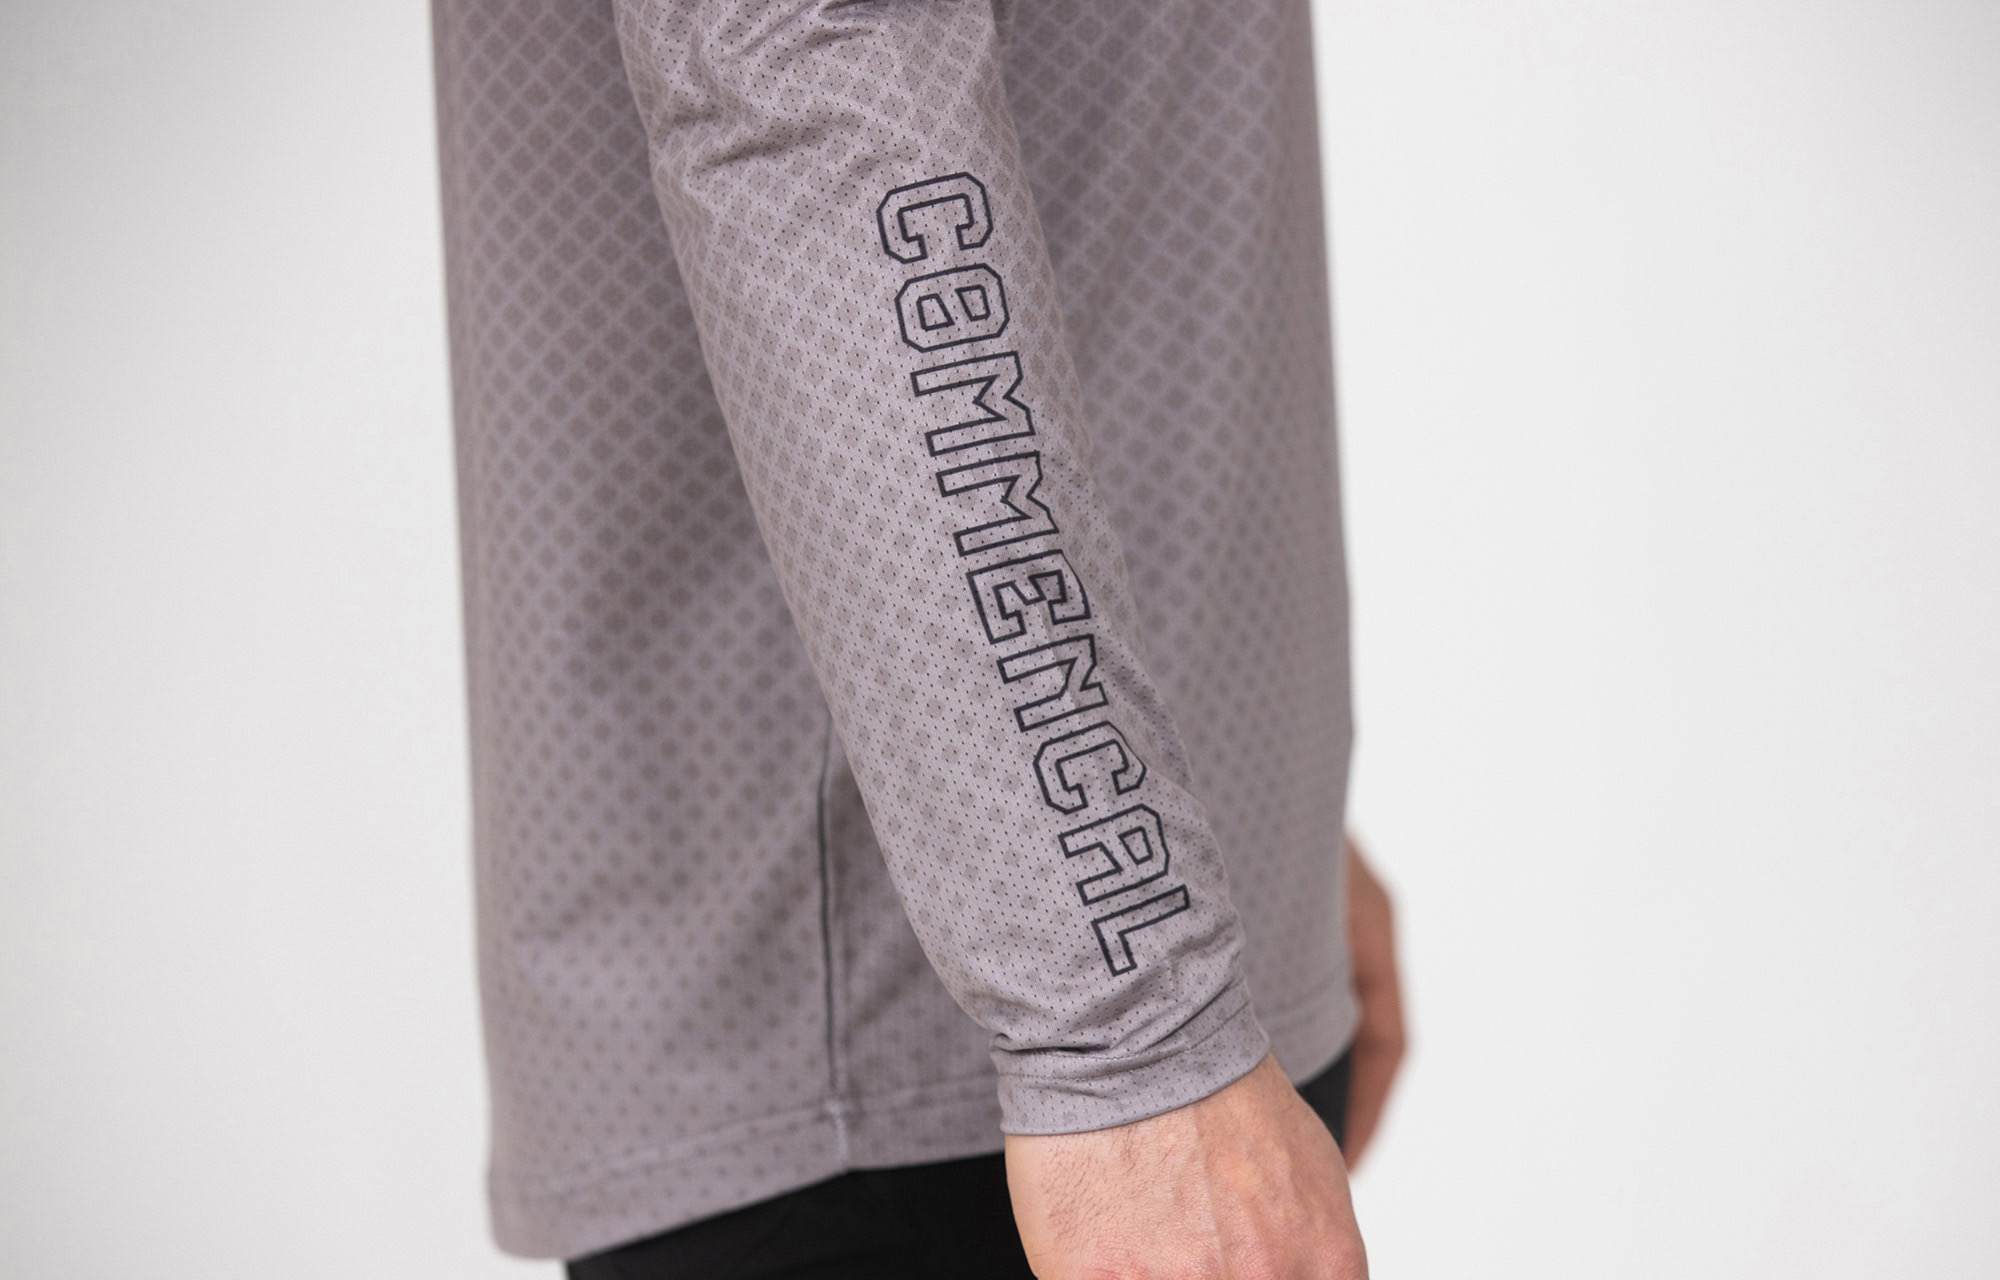 COMMENCAL LONG SLEEVE JERSEY DIRT image number 2